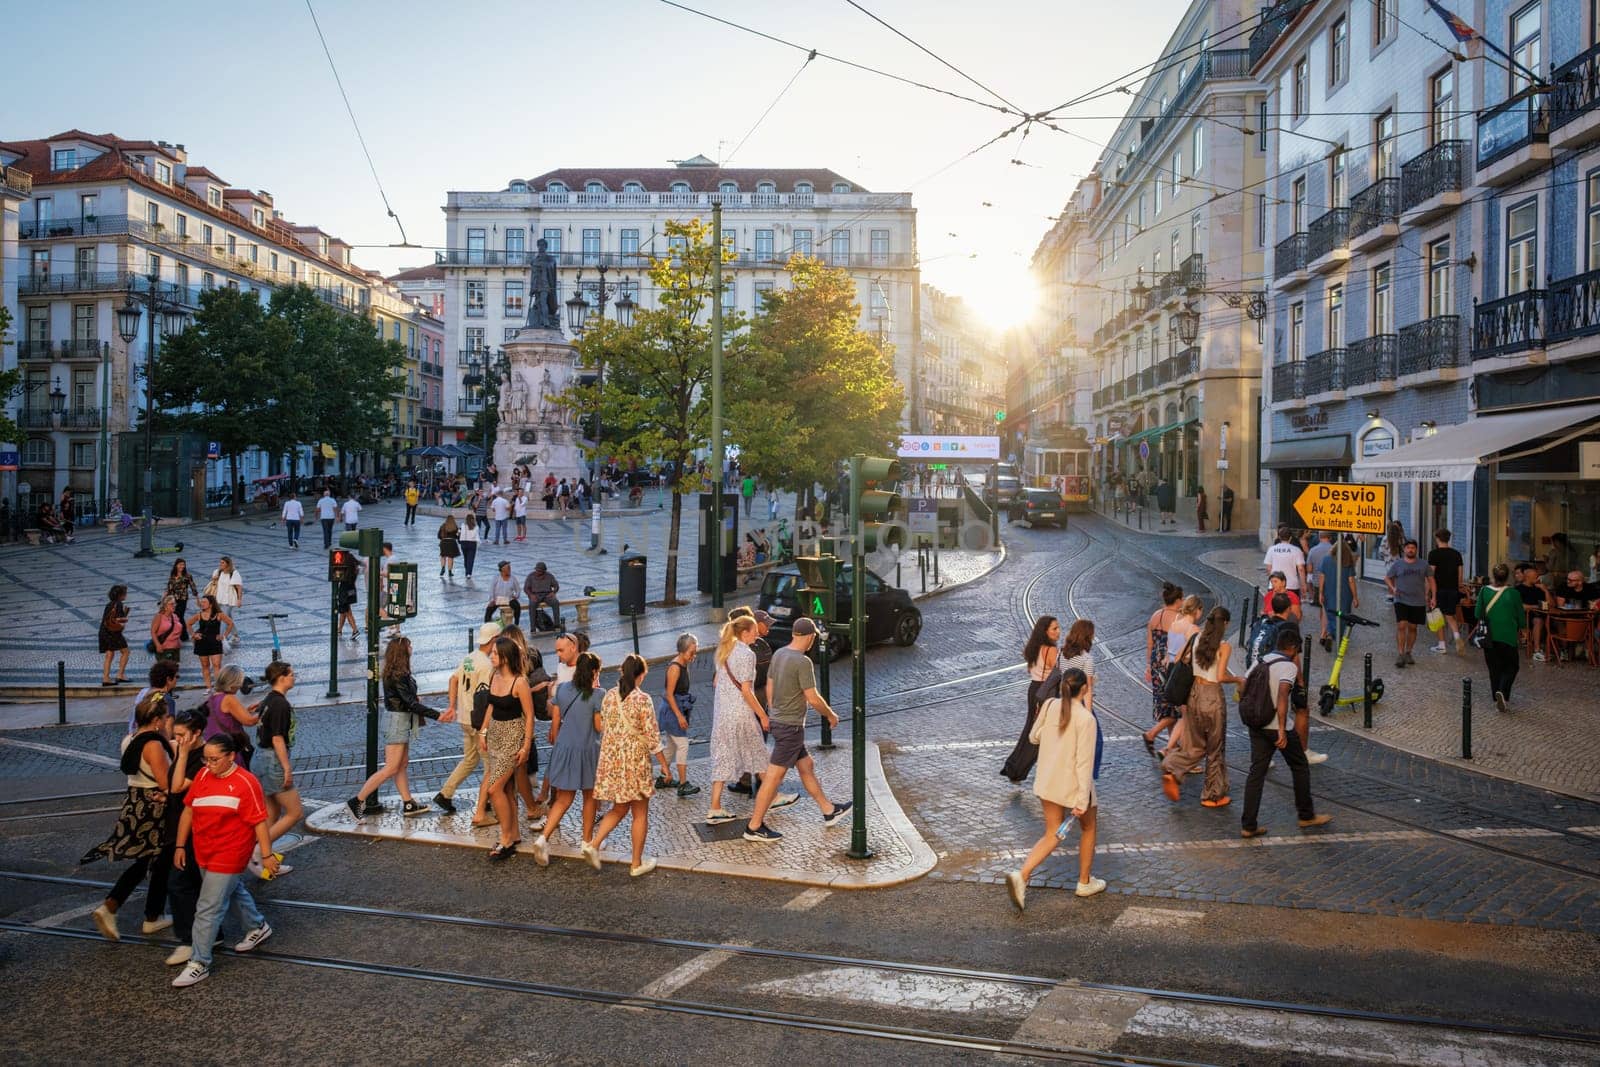 Lisbon, Portugal - September 21, 2022: People crossing the street road at the crowded Luis De Camoes square (Praca Luis de Camoes), one of the biggest squares in Lisbon city in Portugal